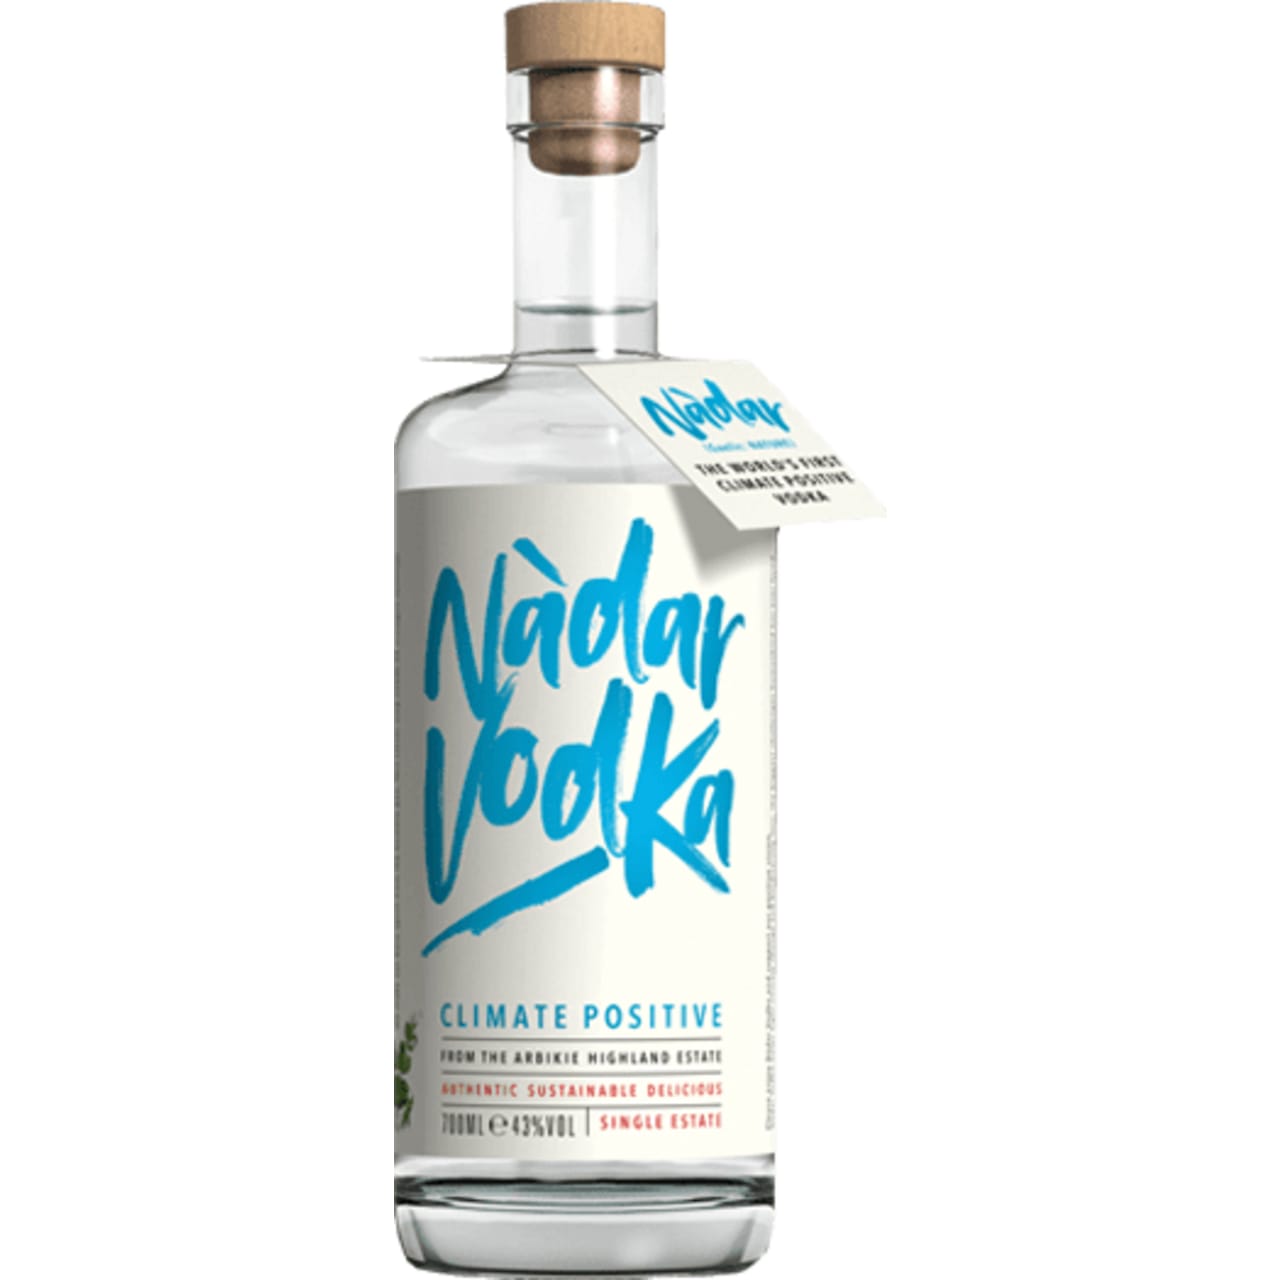 Nàdar Vodka harnesses the power of nature and science to create this world first vodka spirit with a carbon saving of >1.53 kg CO2e per bottle.